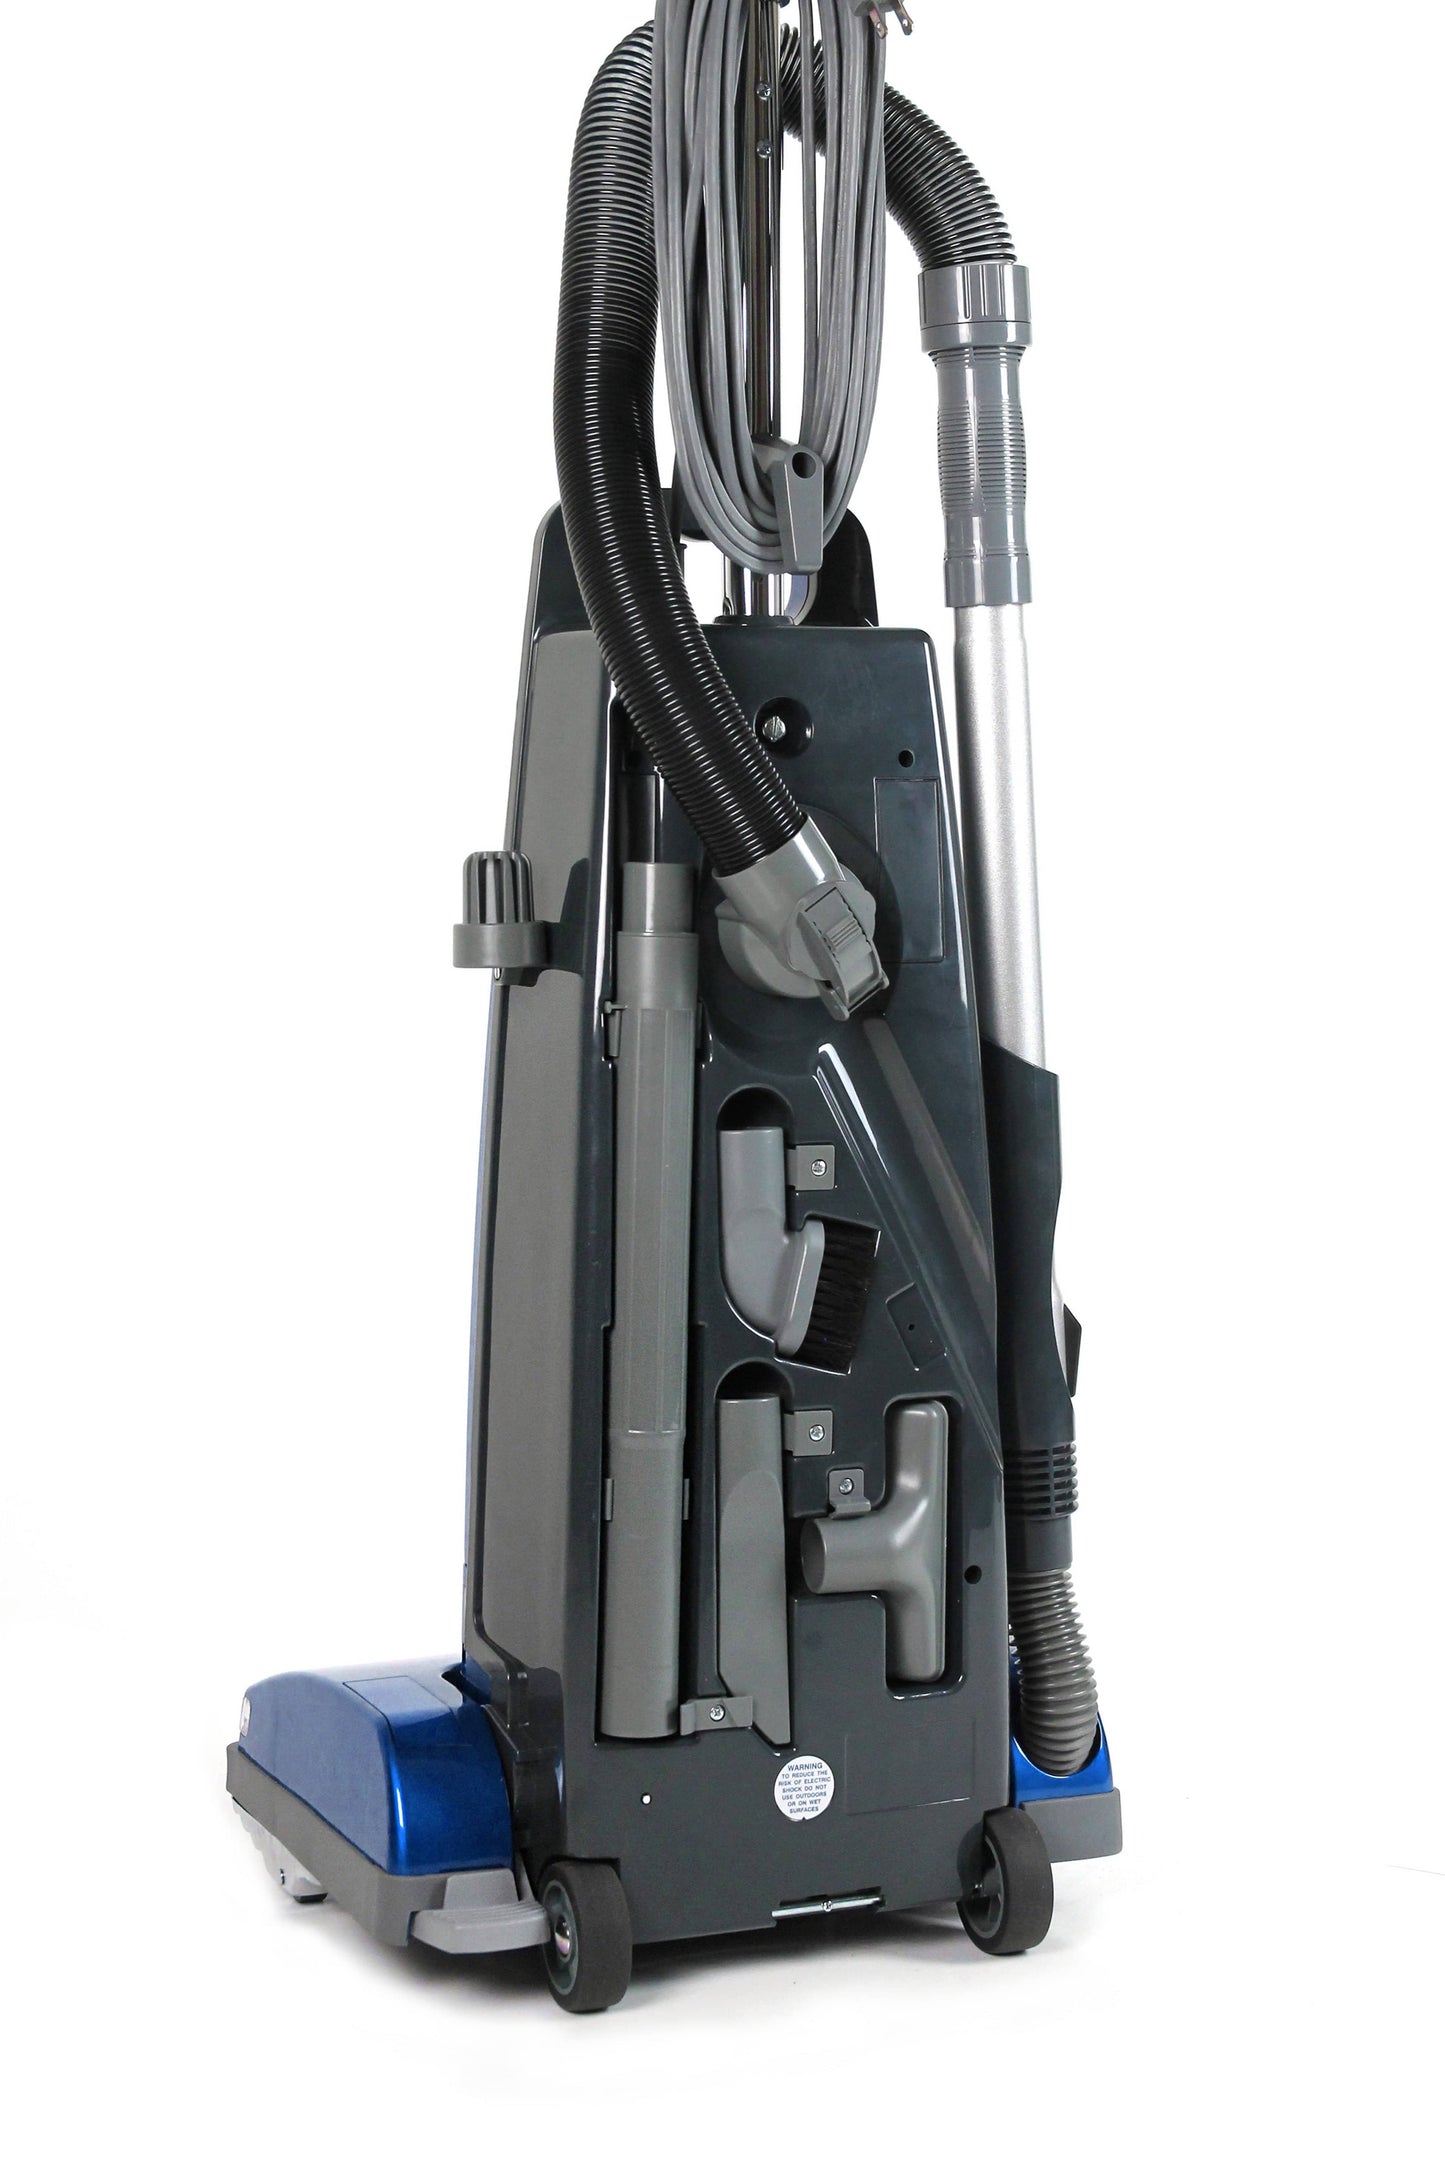 Demo Model Prolux 9000 Upright HEPA Vacuum with 12 AMP Motor and 7 Year Warranty!